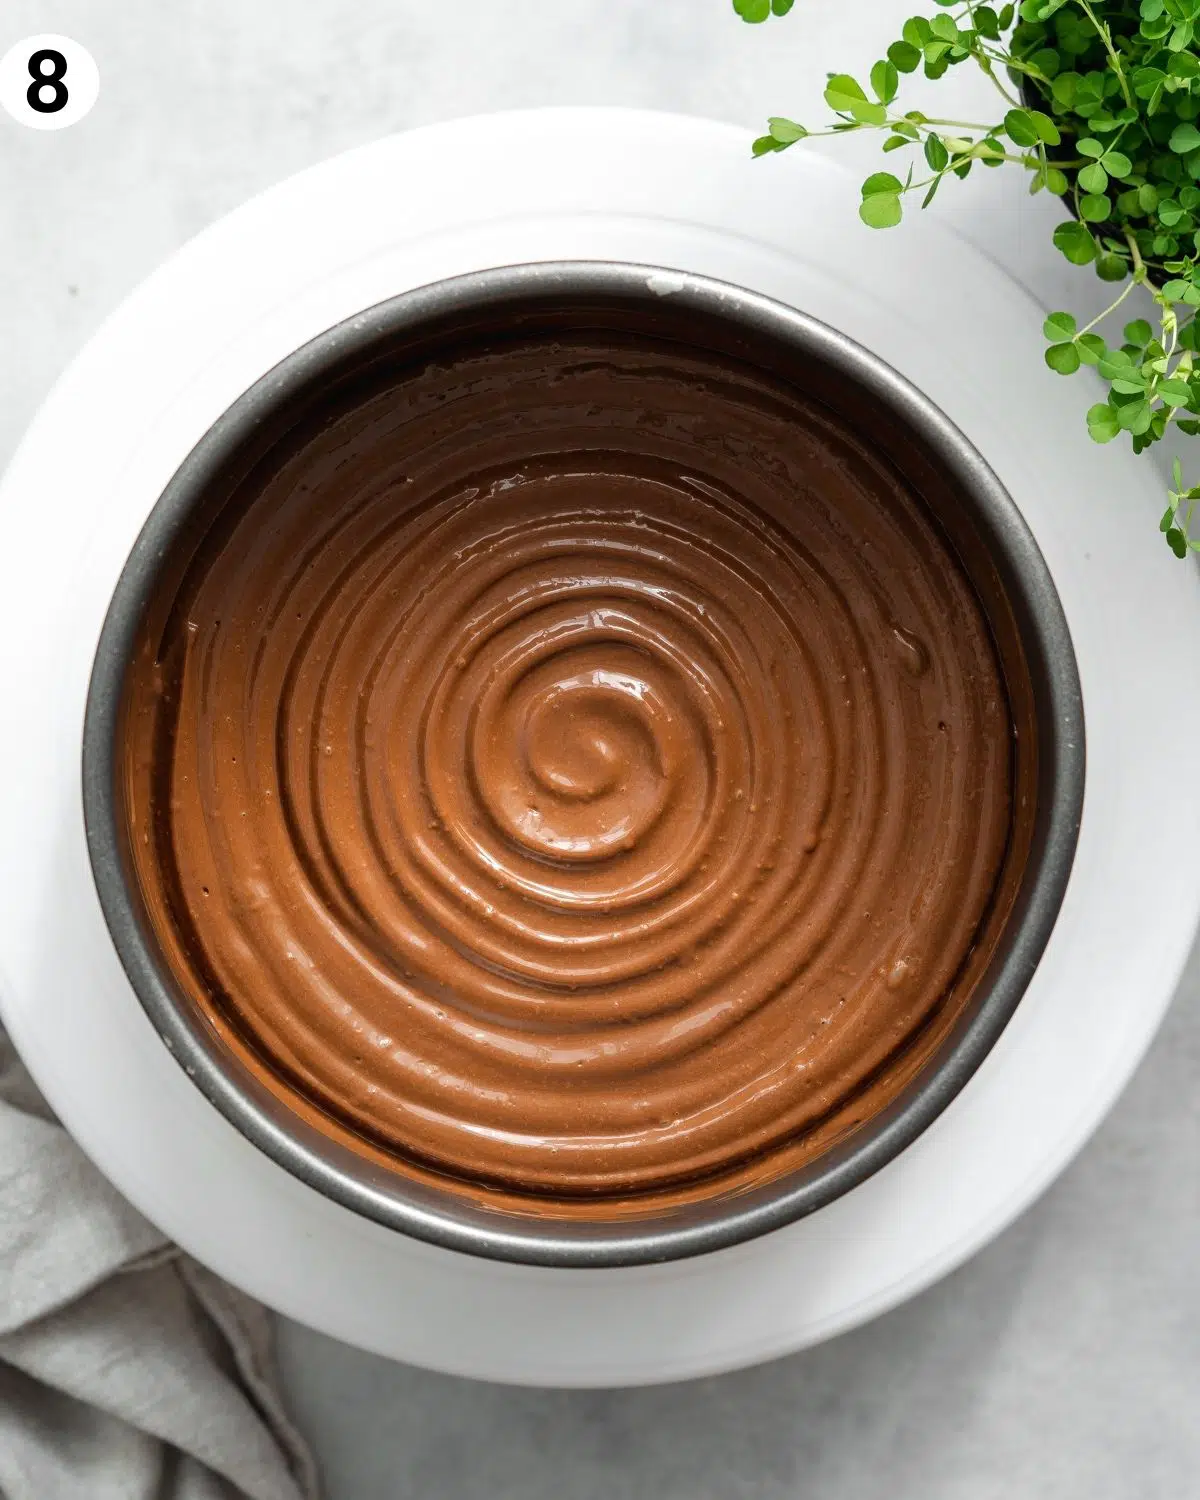 top down view of chocolate cheesecake with swirled topping.